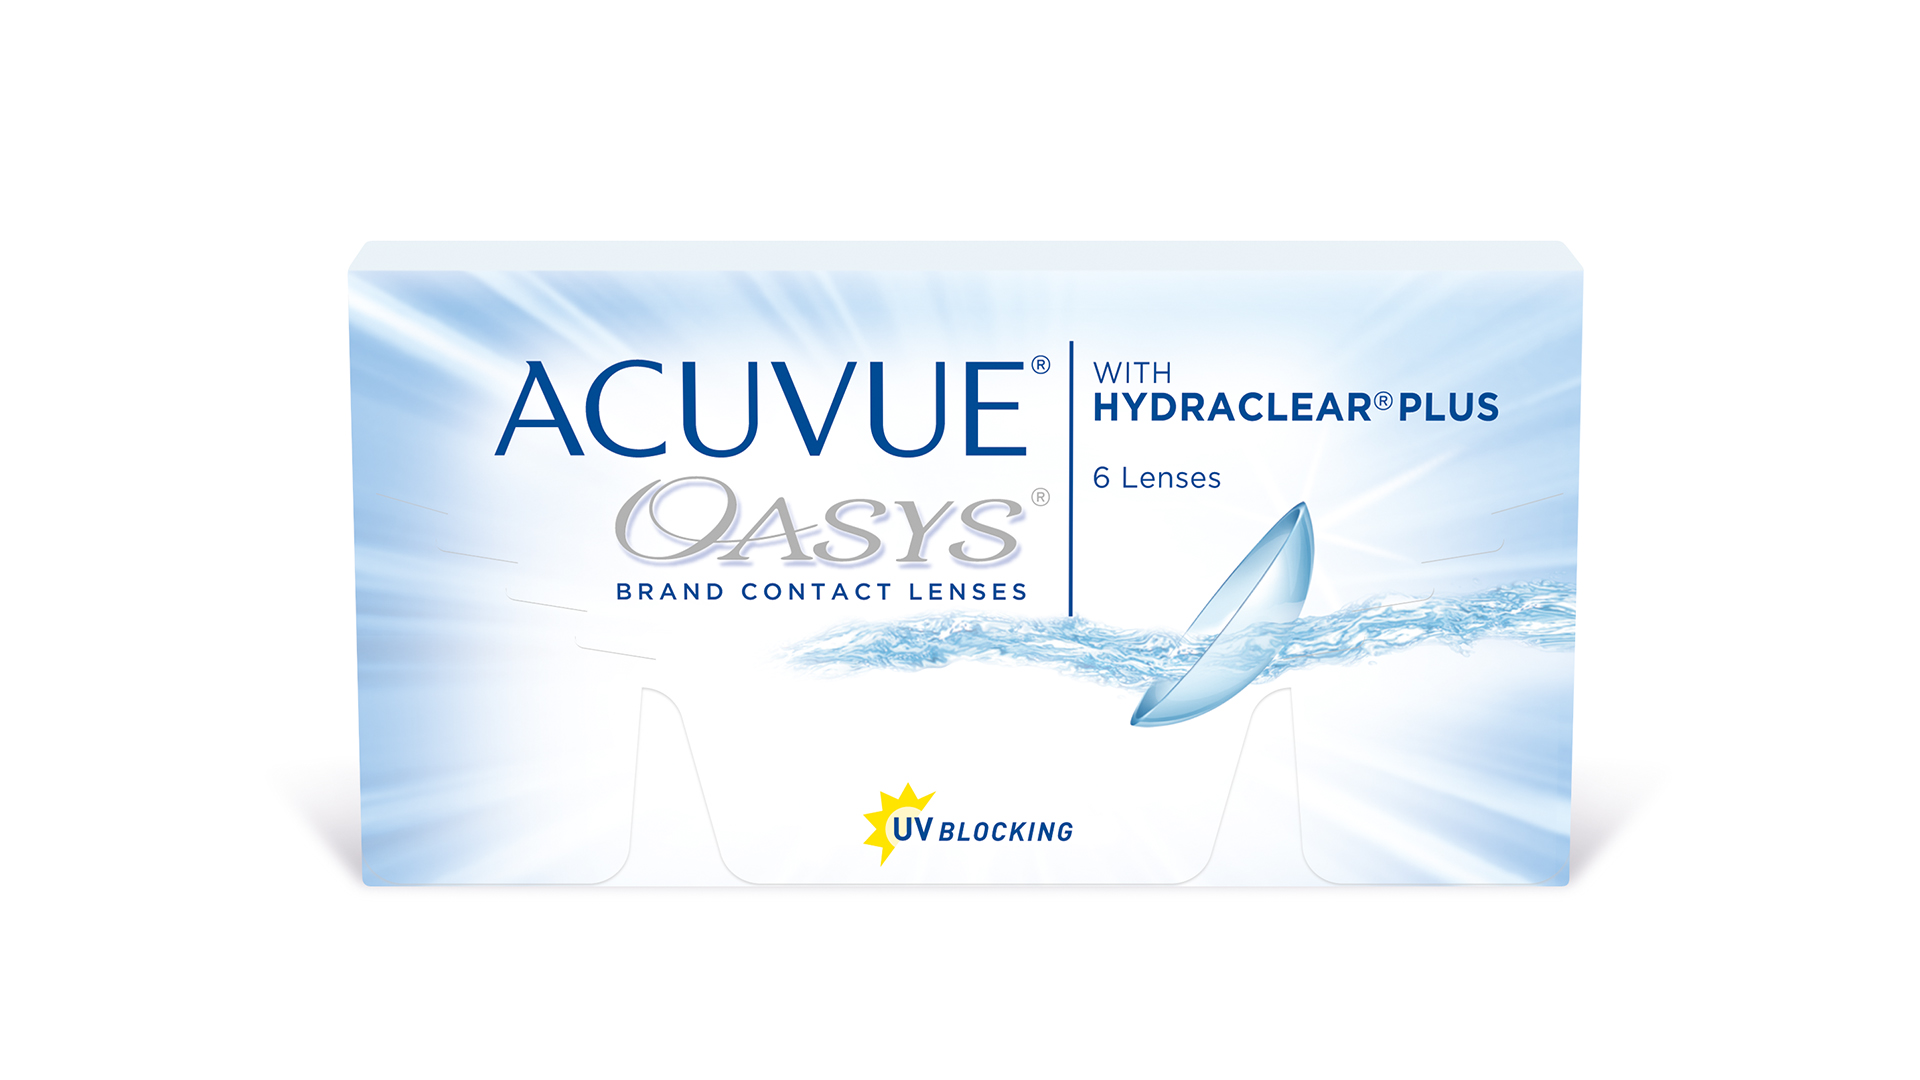 ACUVUE OASYS 2-WEEK with HYDRACLEAR PLUS